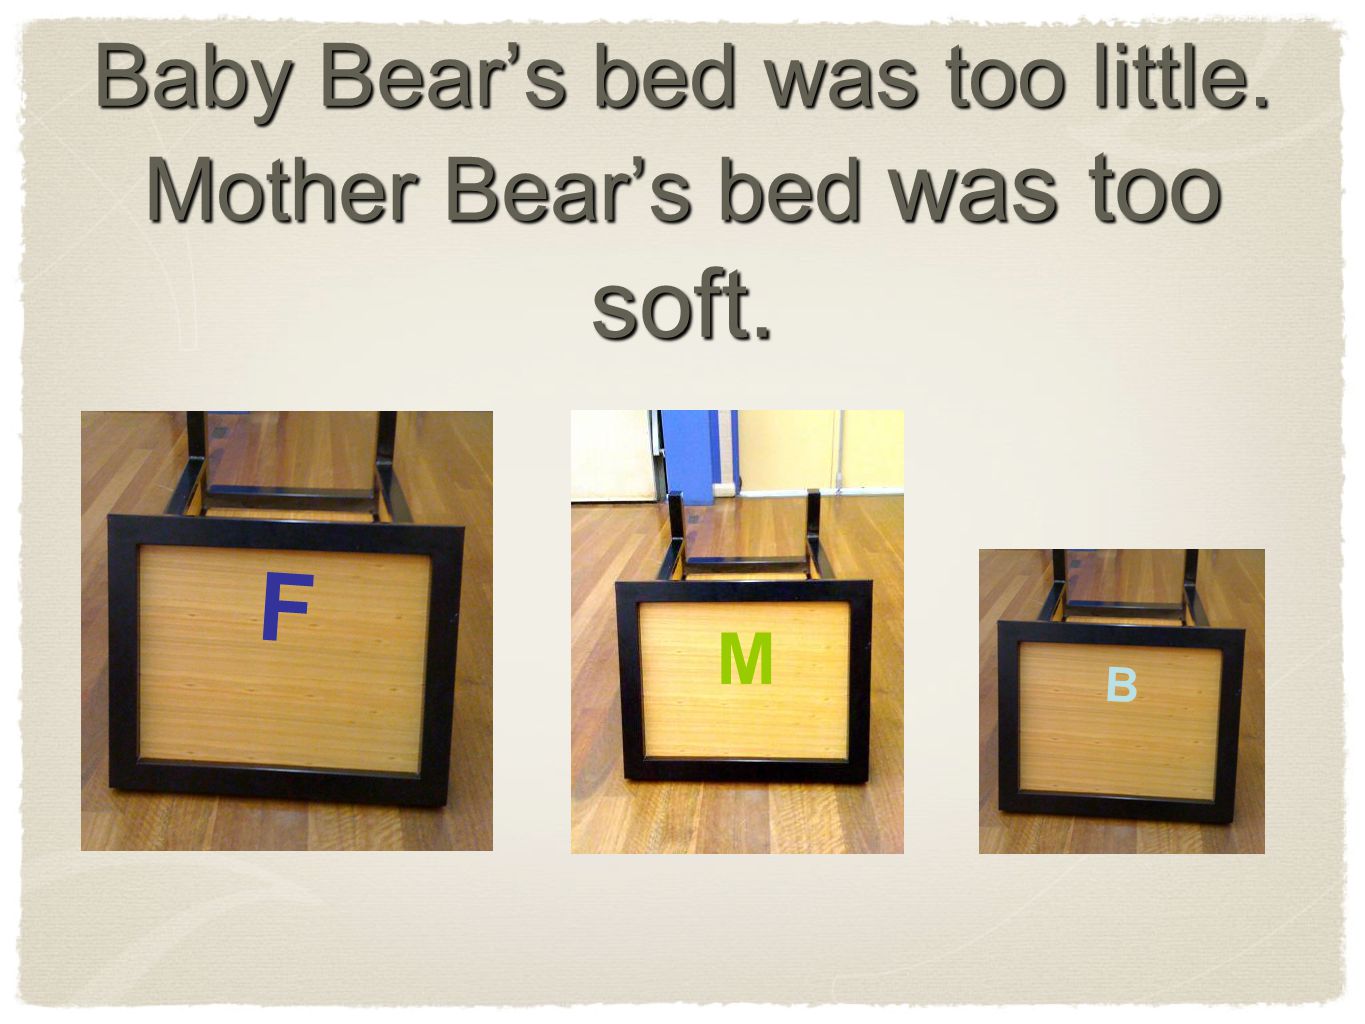 Baby Bear’s bed was too little. Mother Bear’s bed was too soft. M F B